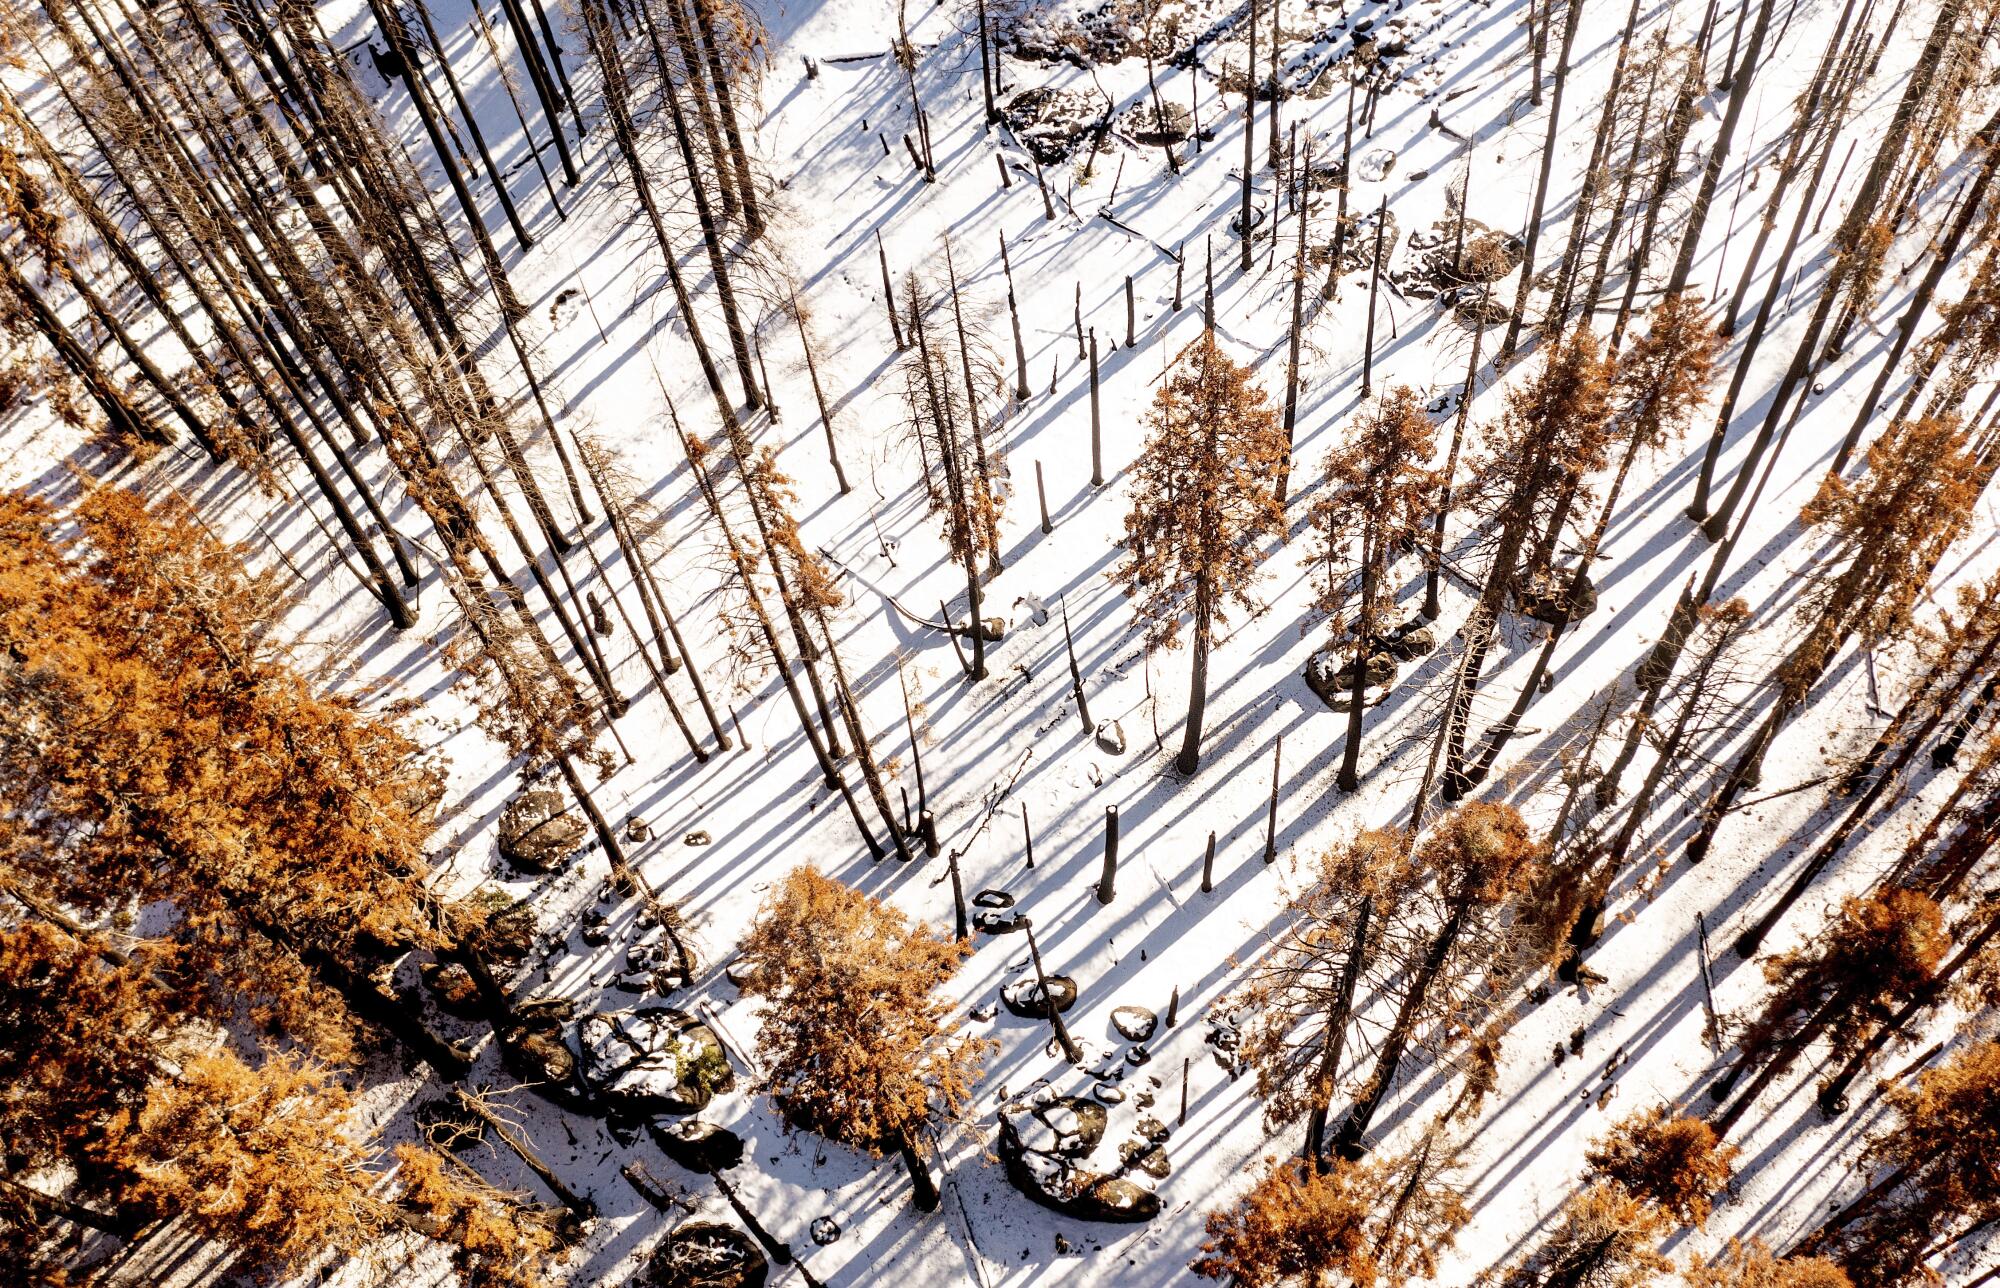 Wildfire-scorched trees on a snow-covered hillside